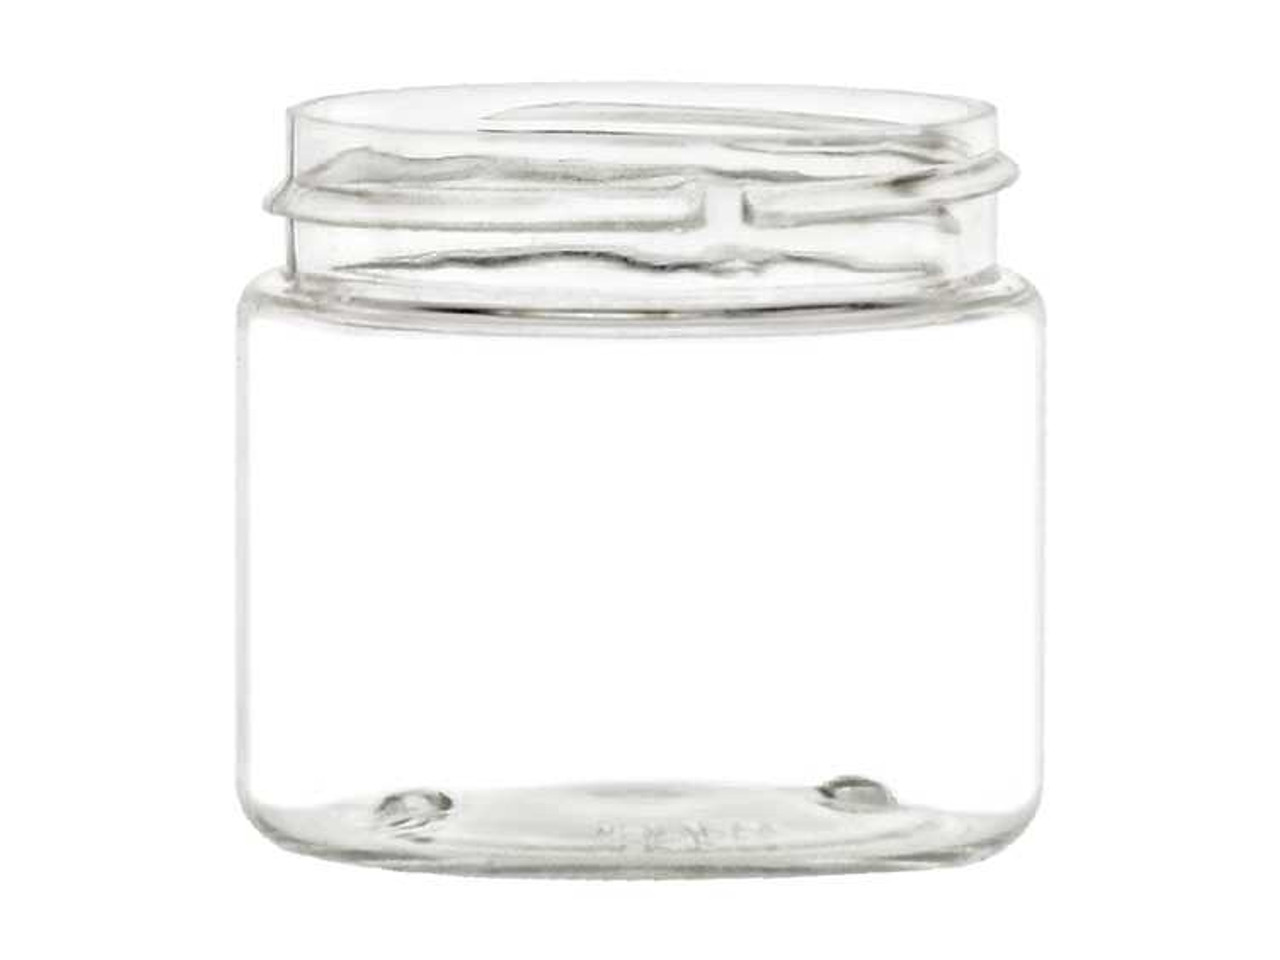 https://cdn11.bigcommerce.com/s-1ybtx/images/stencil/1280x1280/products/603/5738/2-oz-Clear-Single-Wall-Plastic-Jar-with-Your-Choice-of-Lid_4067__90978.1674160652.jpg?c=2